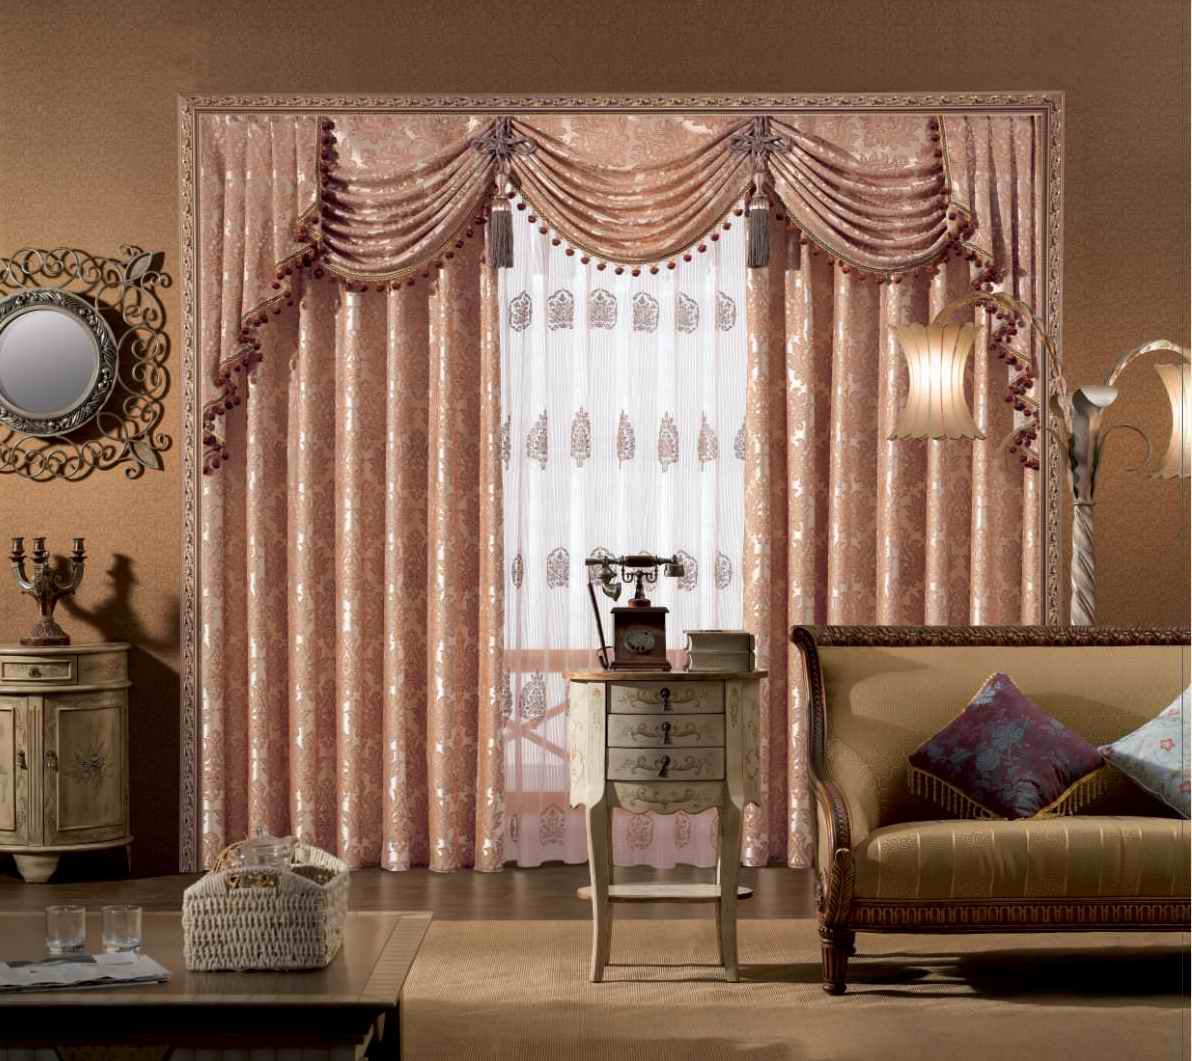 Drapes And Curtains For A Beautiful House